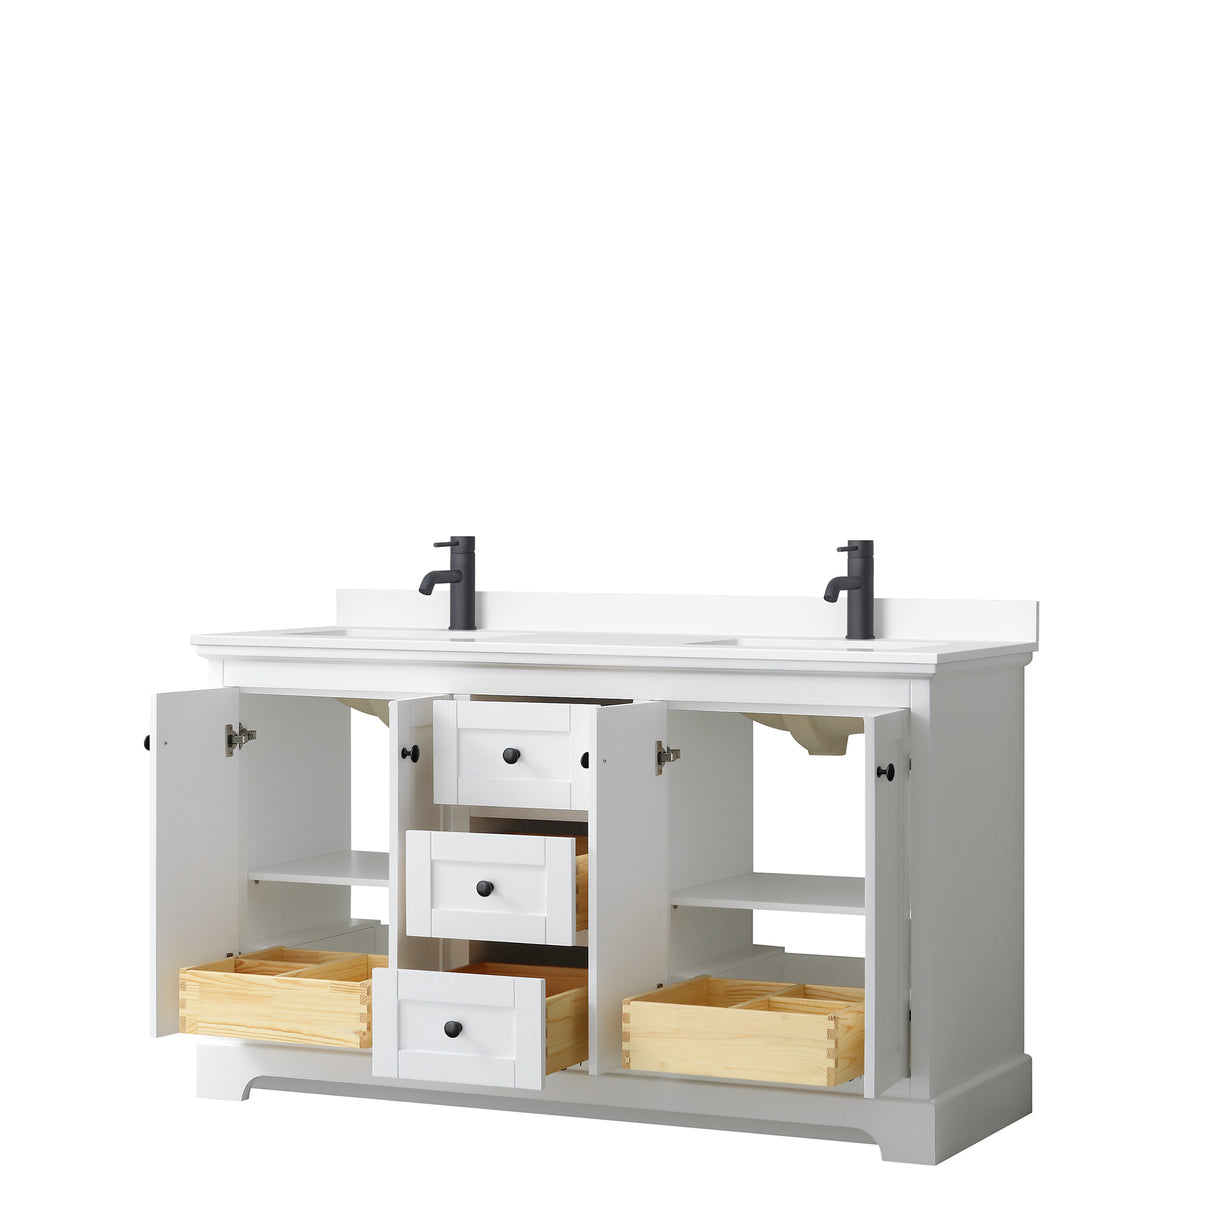 Avery 60 Inch Double Bathroom Vanity in White White Cultured Marble Countertop Undermount Square Sinks Matte Black Trim